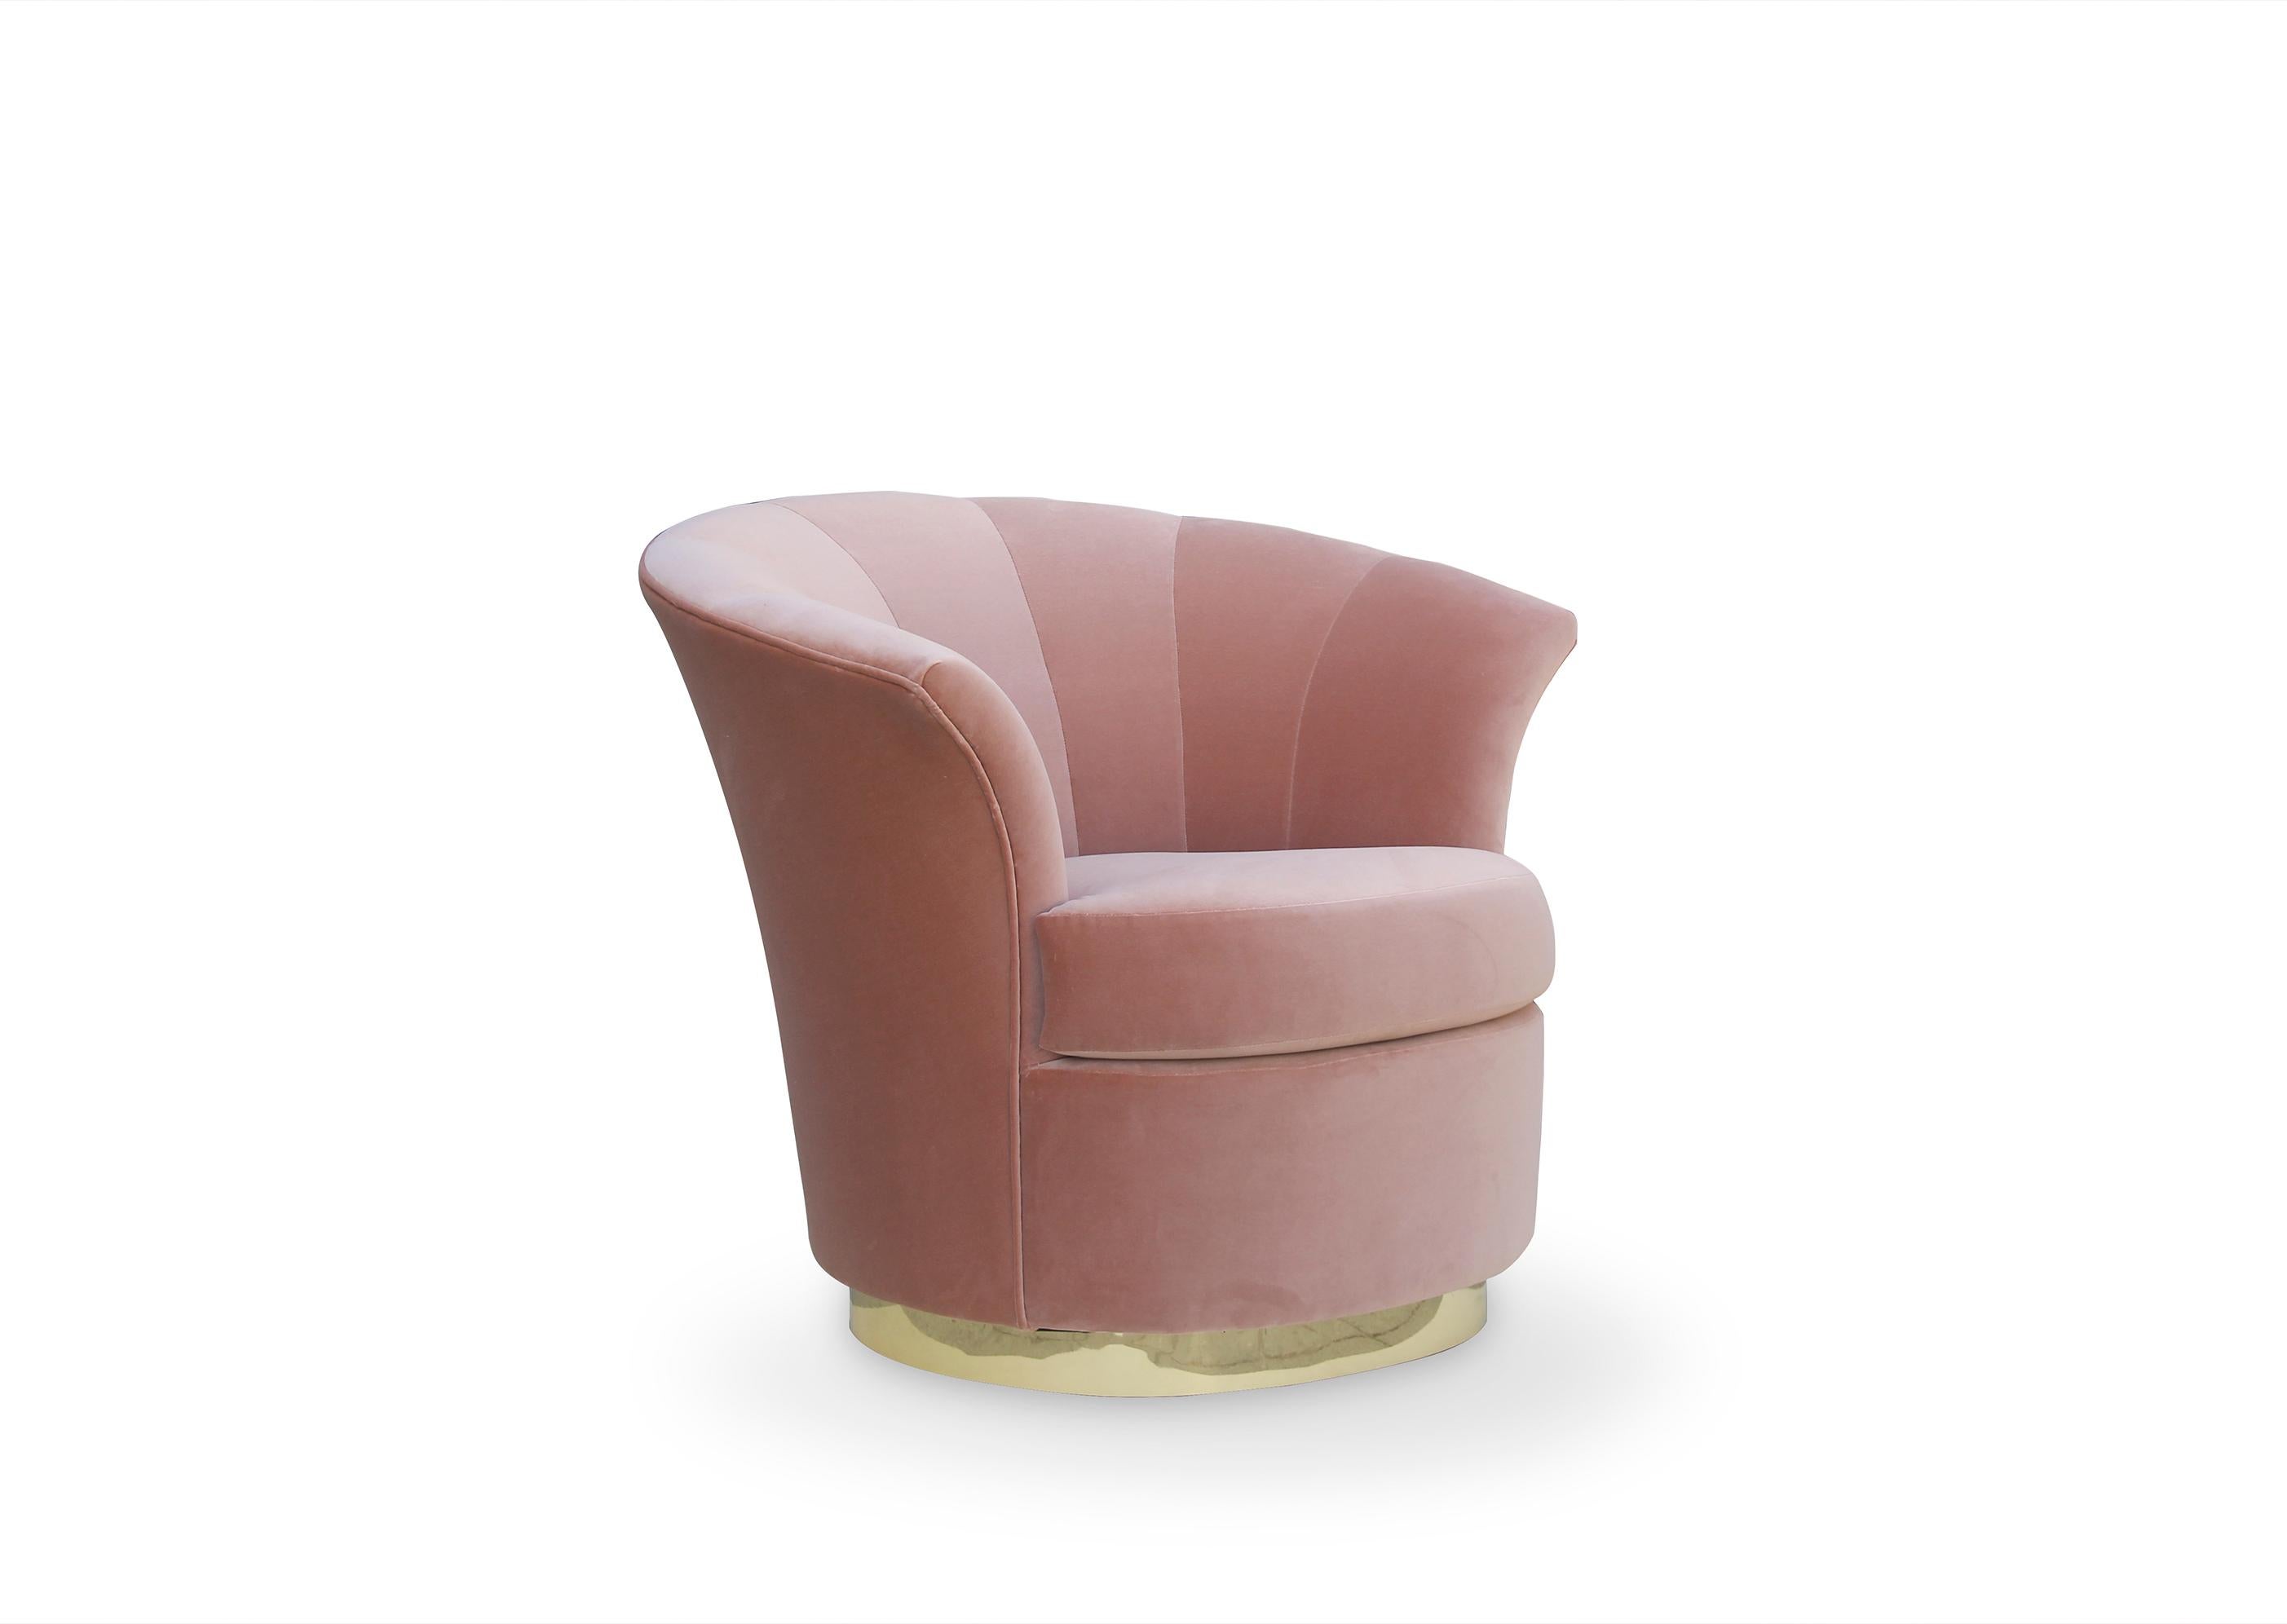 The succulent lines of the lips have sensuously captivated cultures for ages. Besame’s soft, plump curves will have you lusting for a moment of passion. Be embraced by this fully upholstered chair that sits puckered atop a metal ring